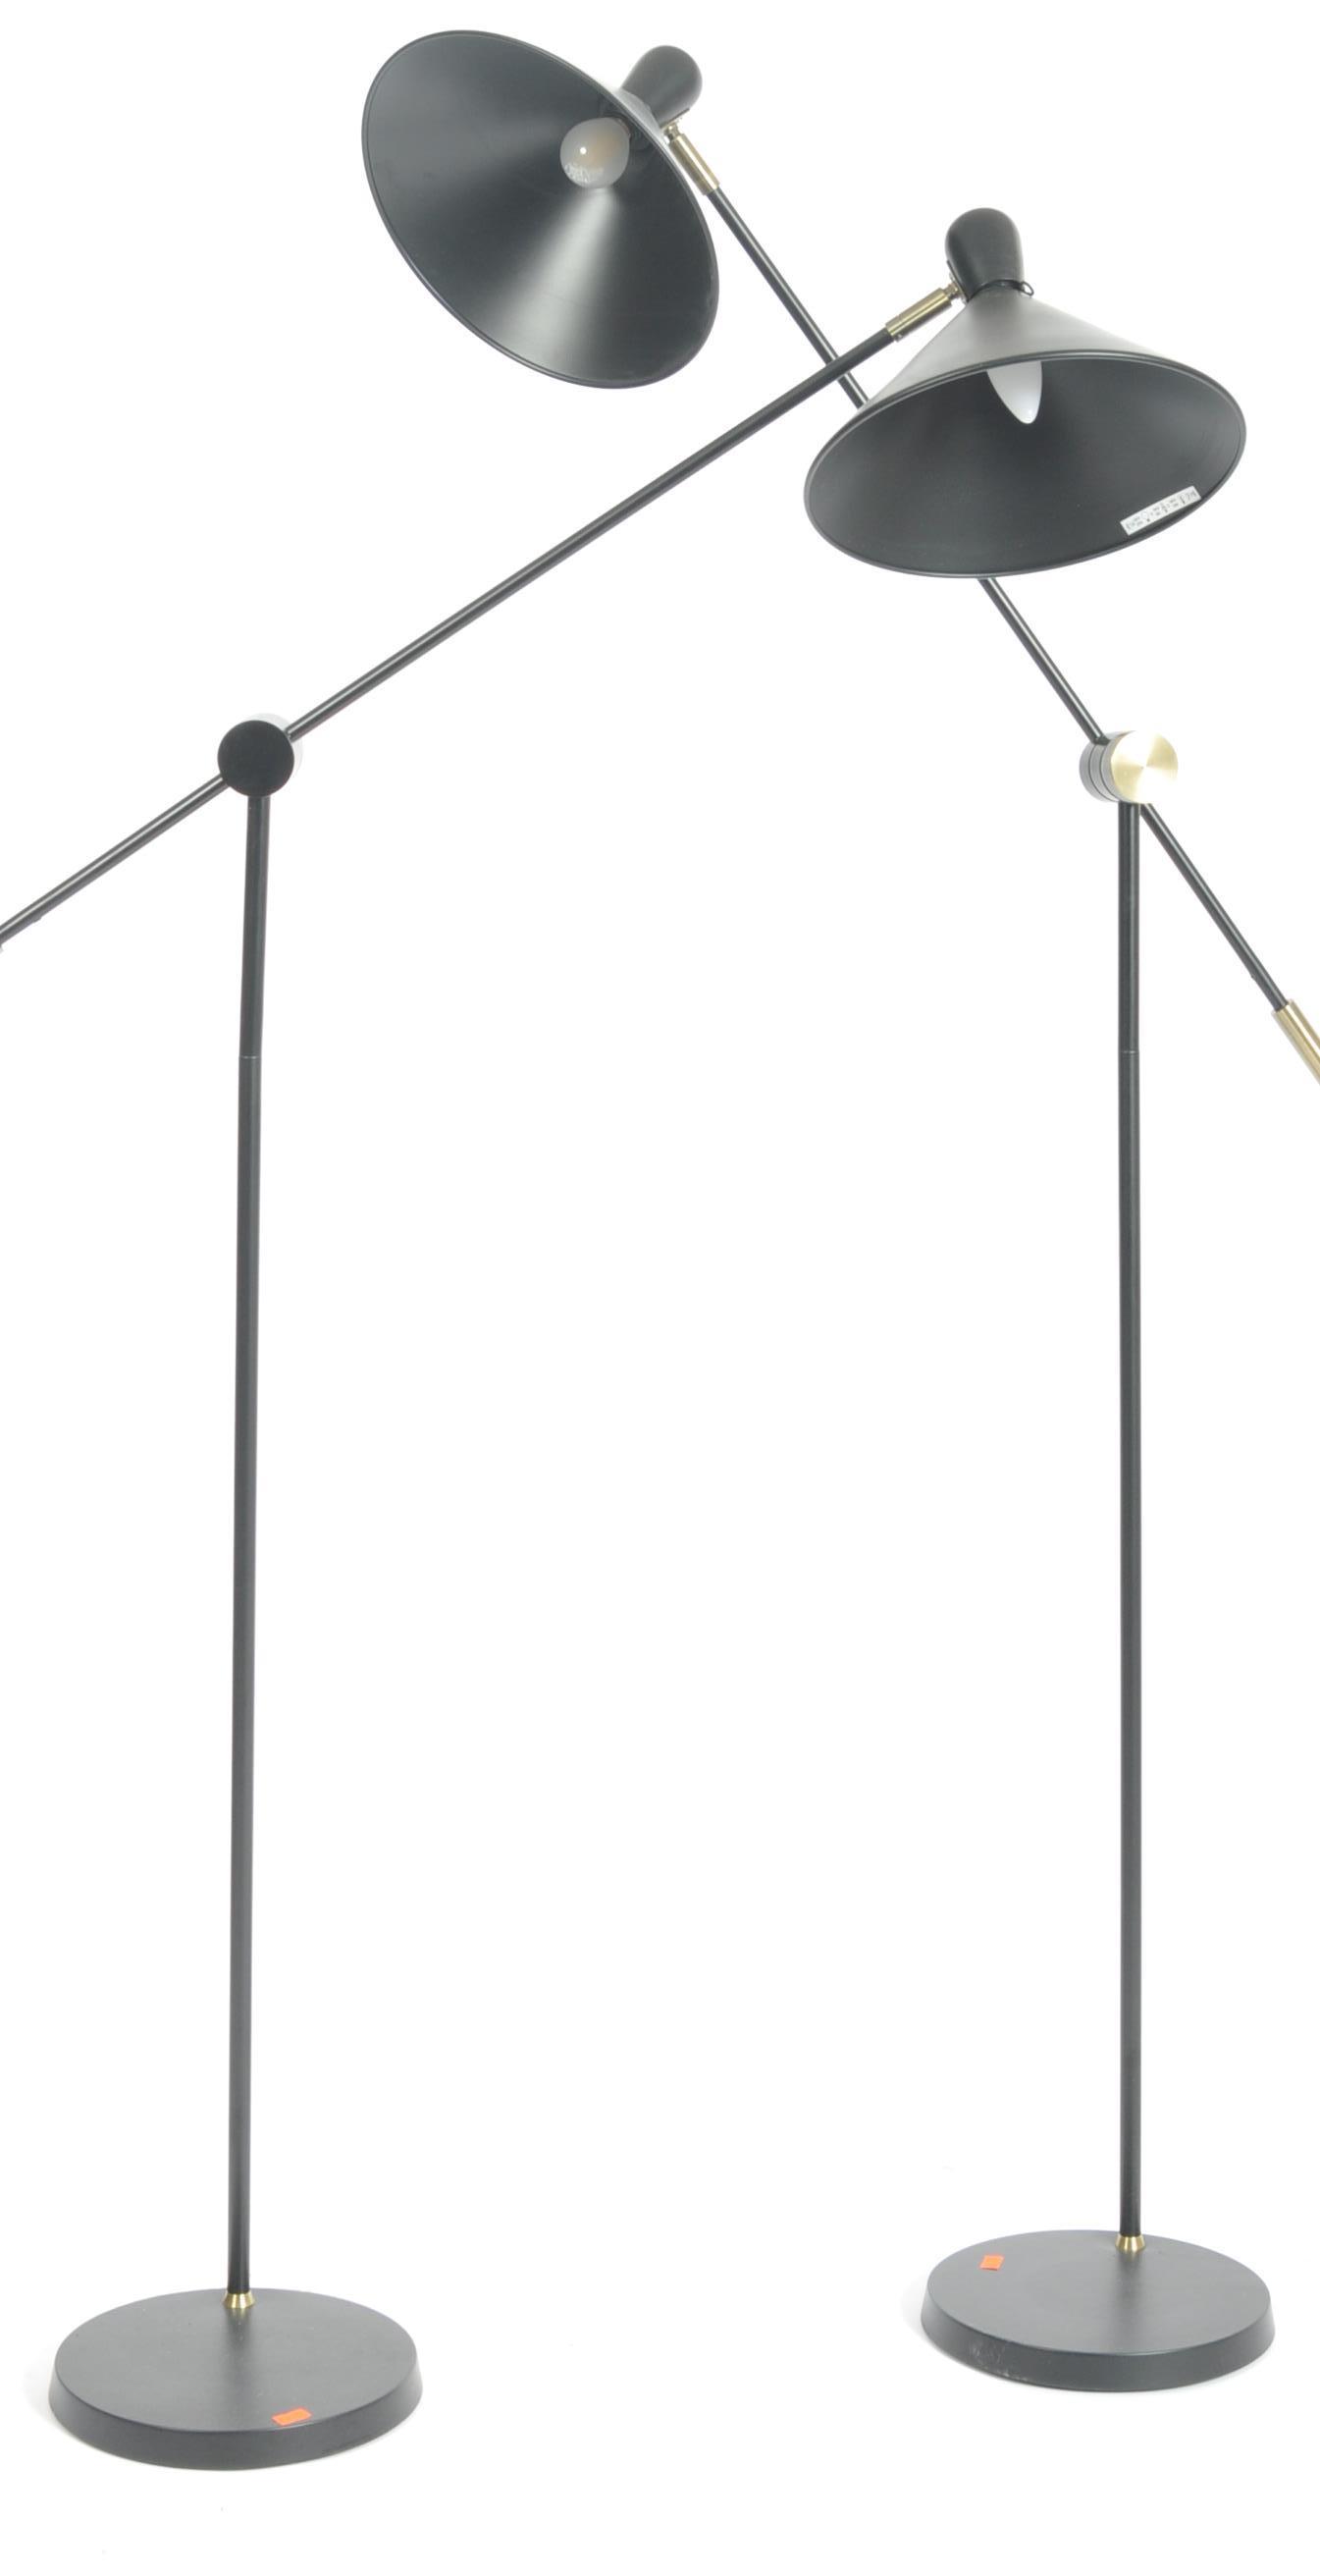 PAIR OF CONTEMPORARY FLOOR STANDING LAMP LIGHTS